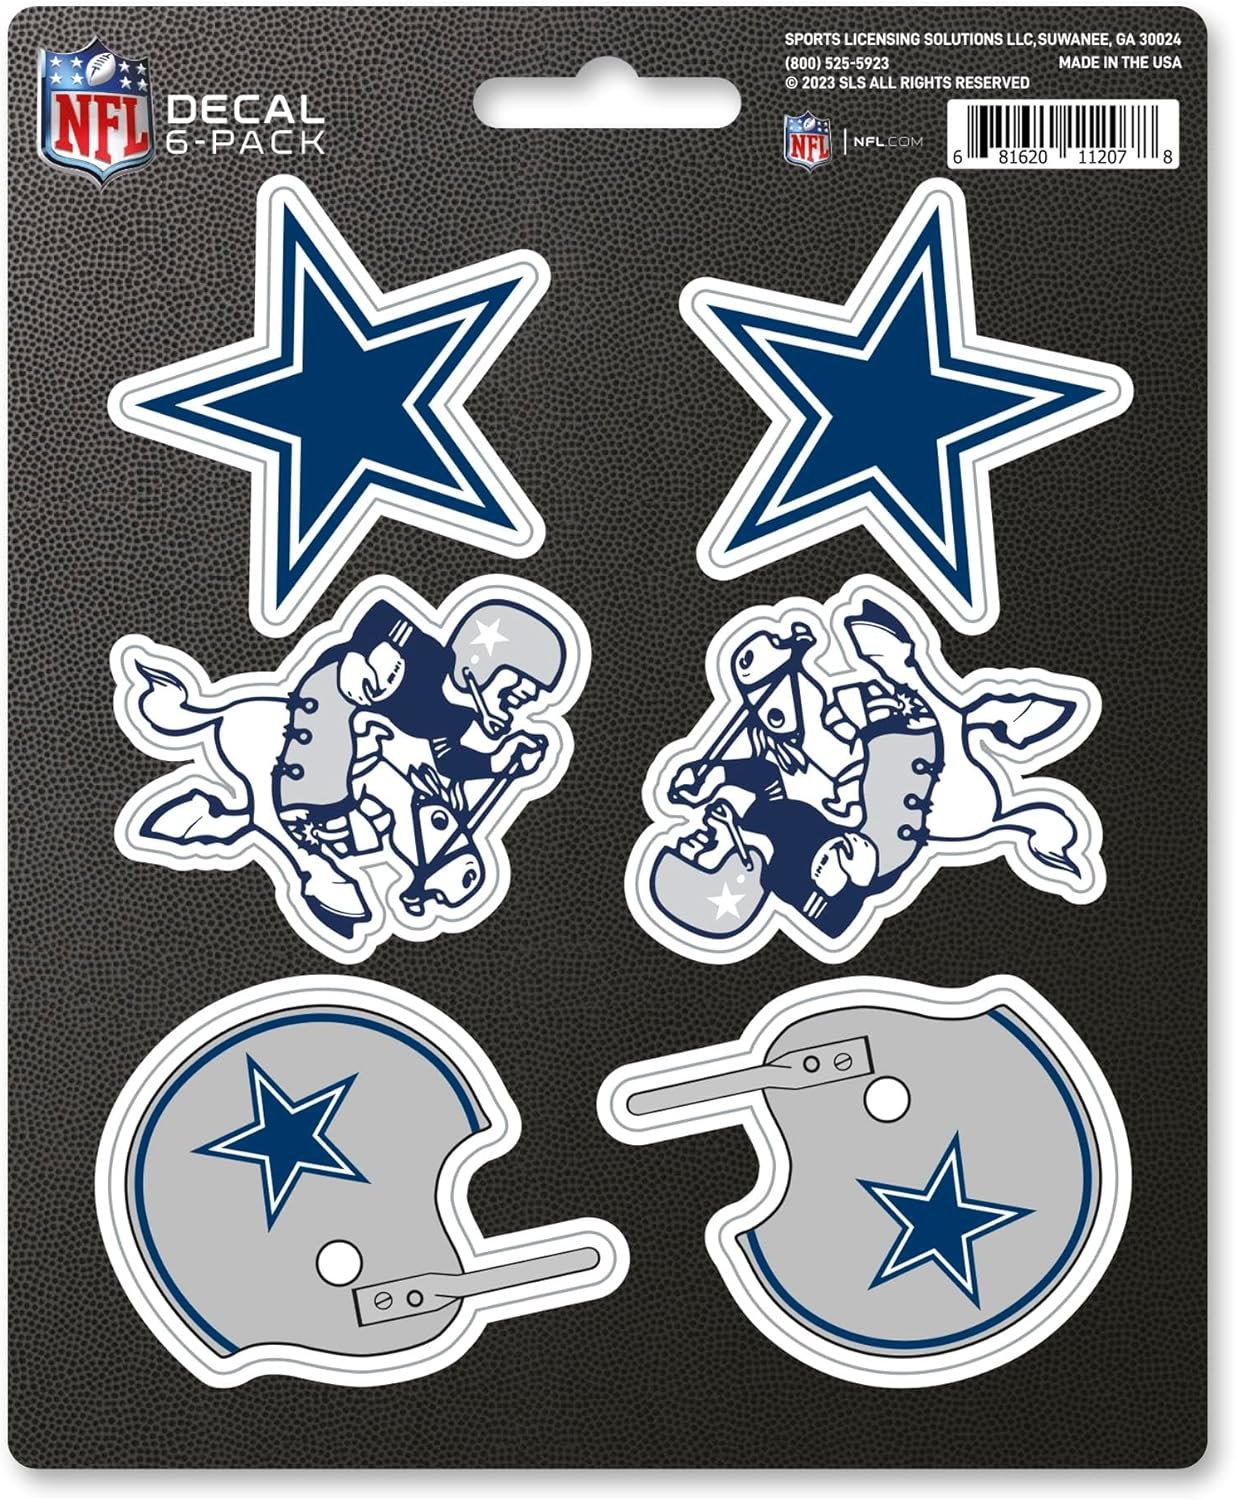 Dallas Cowboys 6-Piece Decal Sticker Set, Vintage Retro Logo, 5x6 Inch Sheet, Gift for football fans for any hard surfaces around home, automotive, personal items